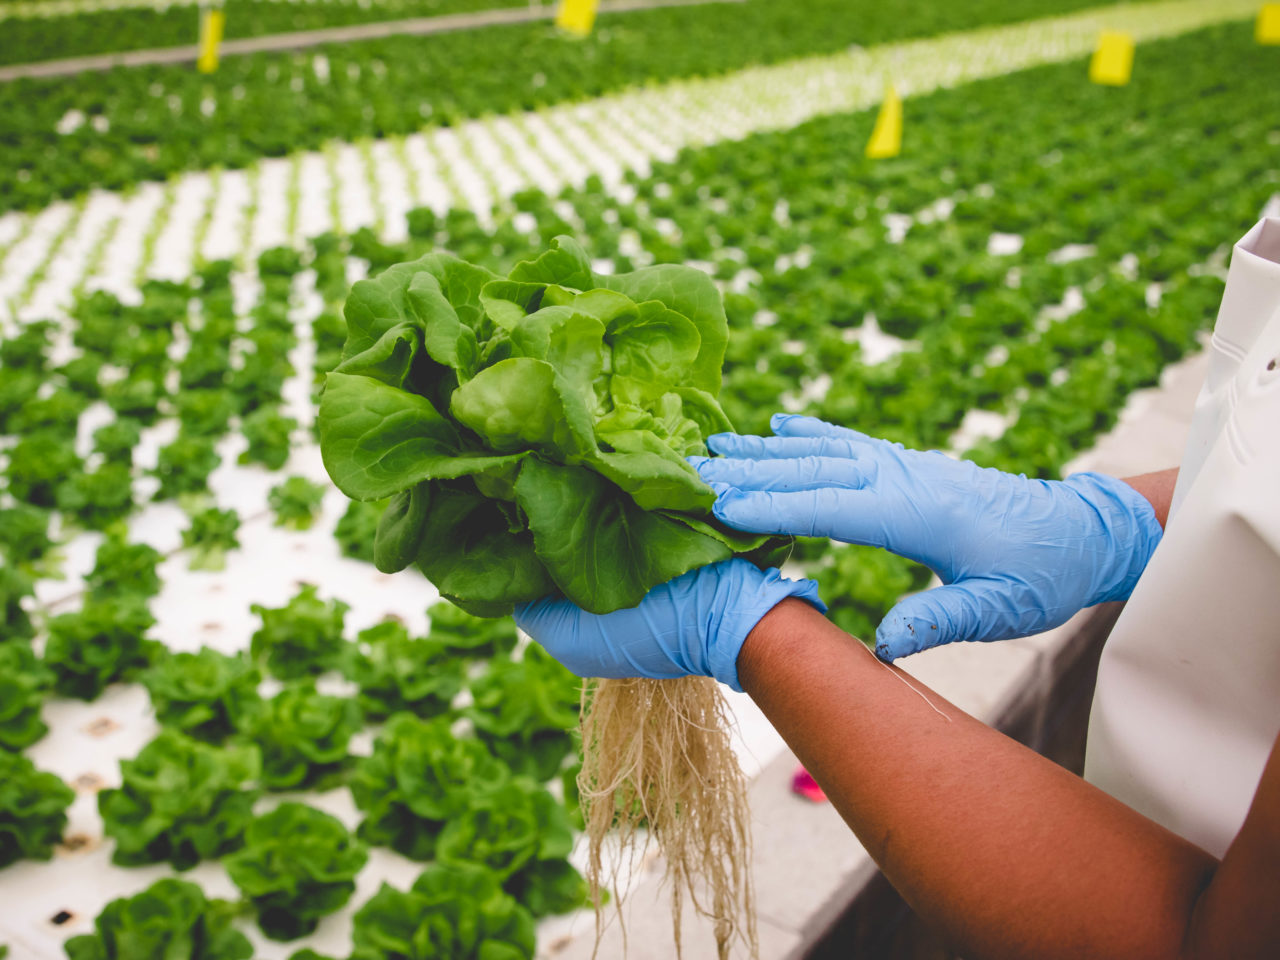 biotherm crops grown in hydroponic system